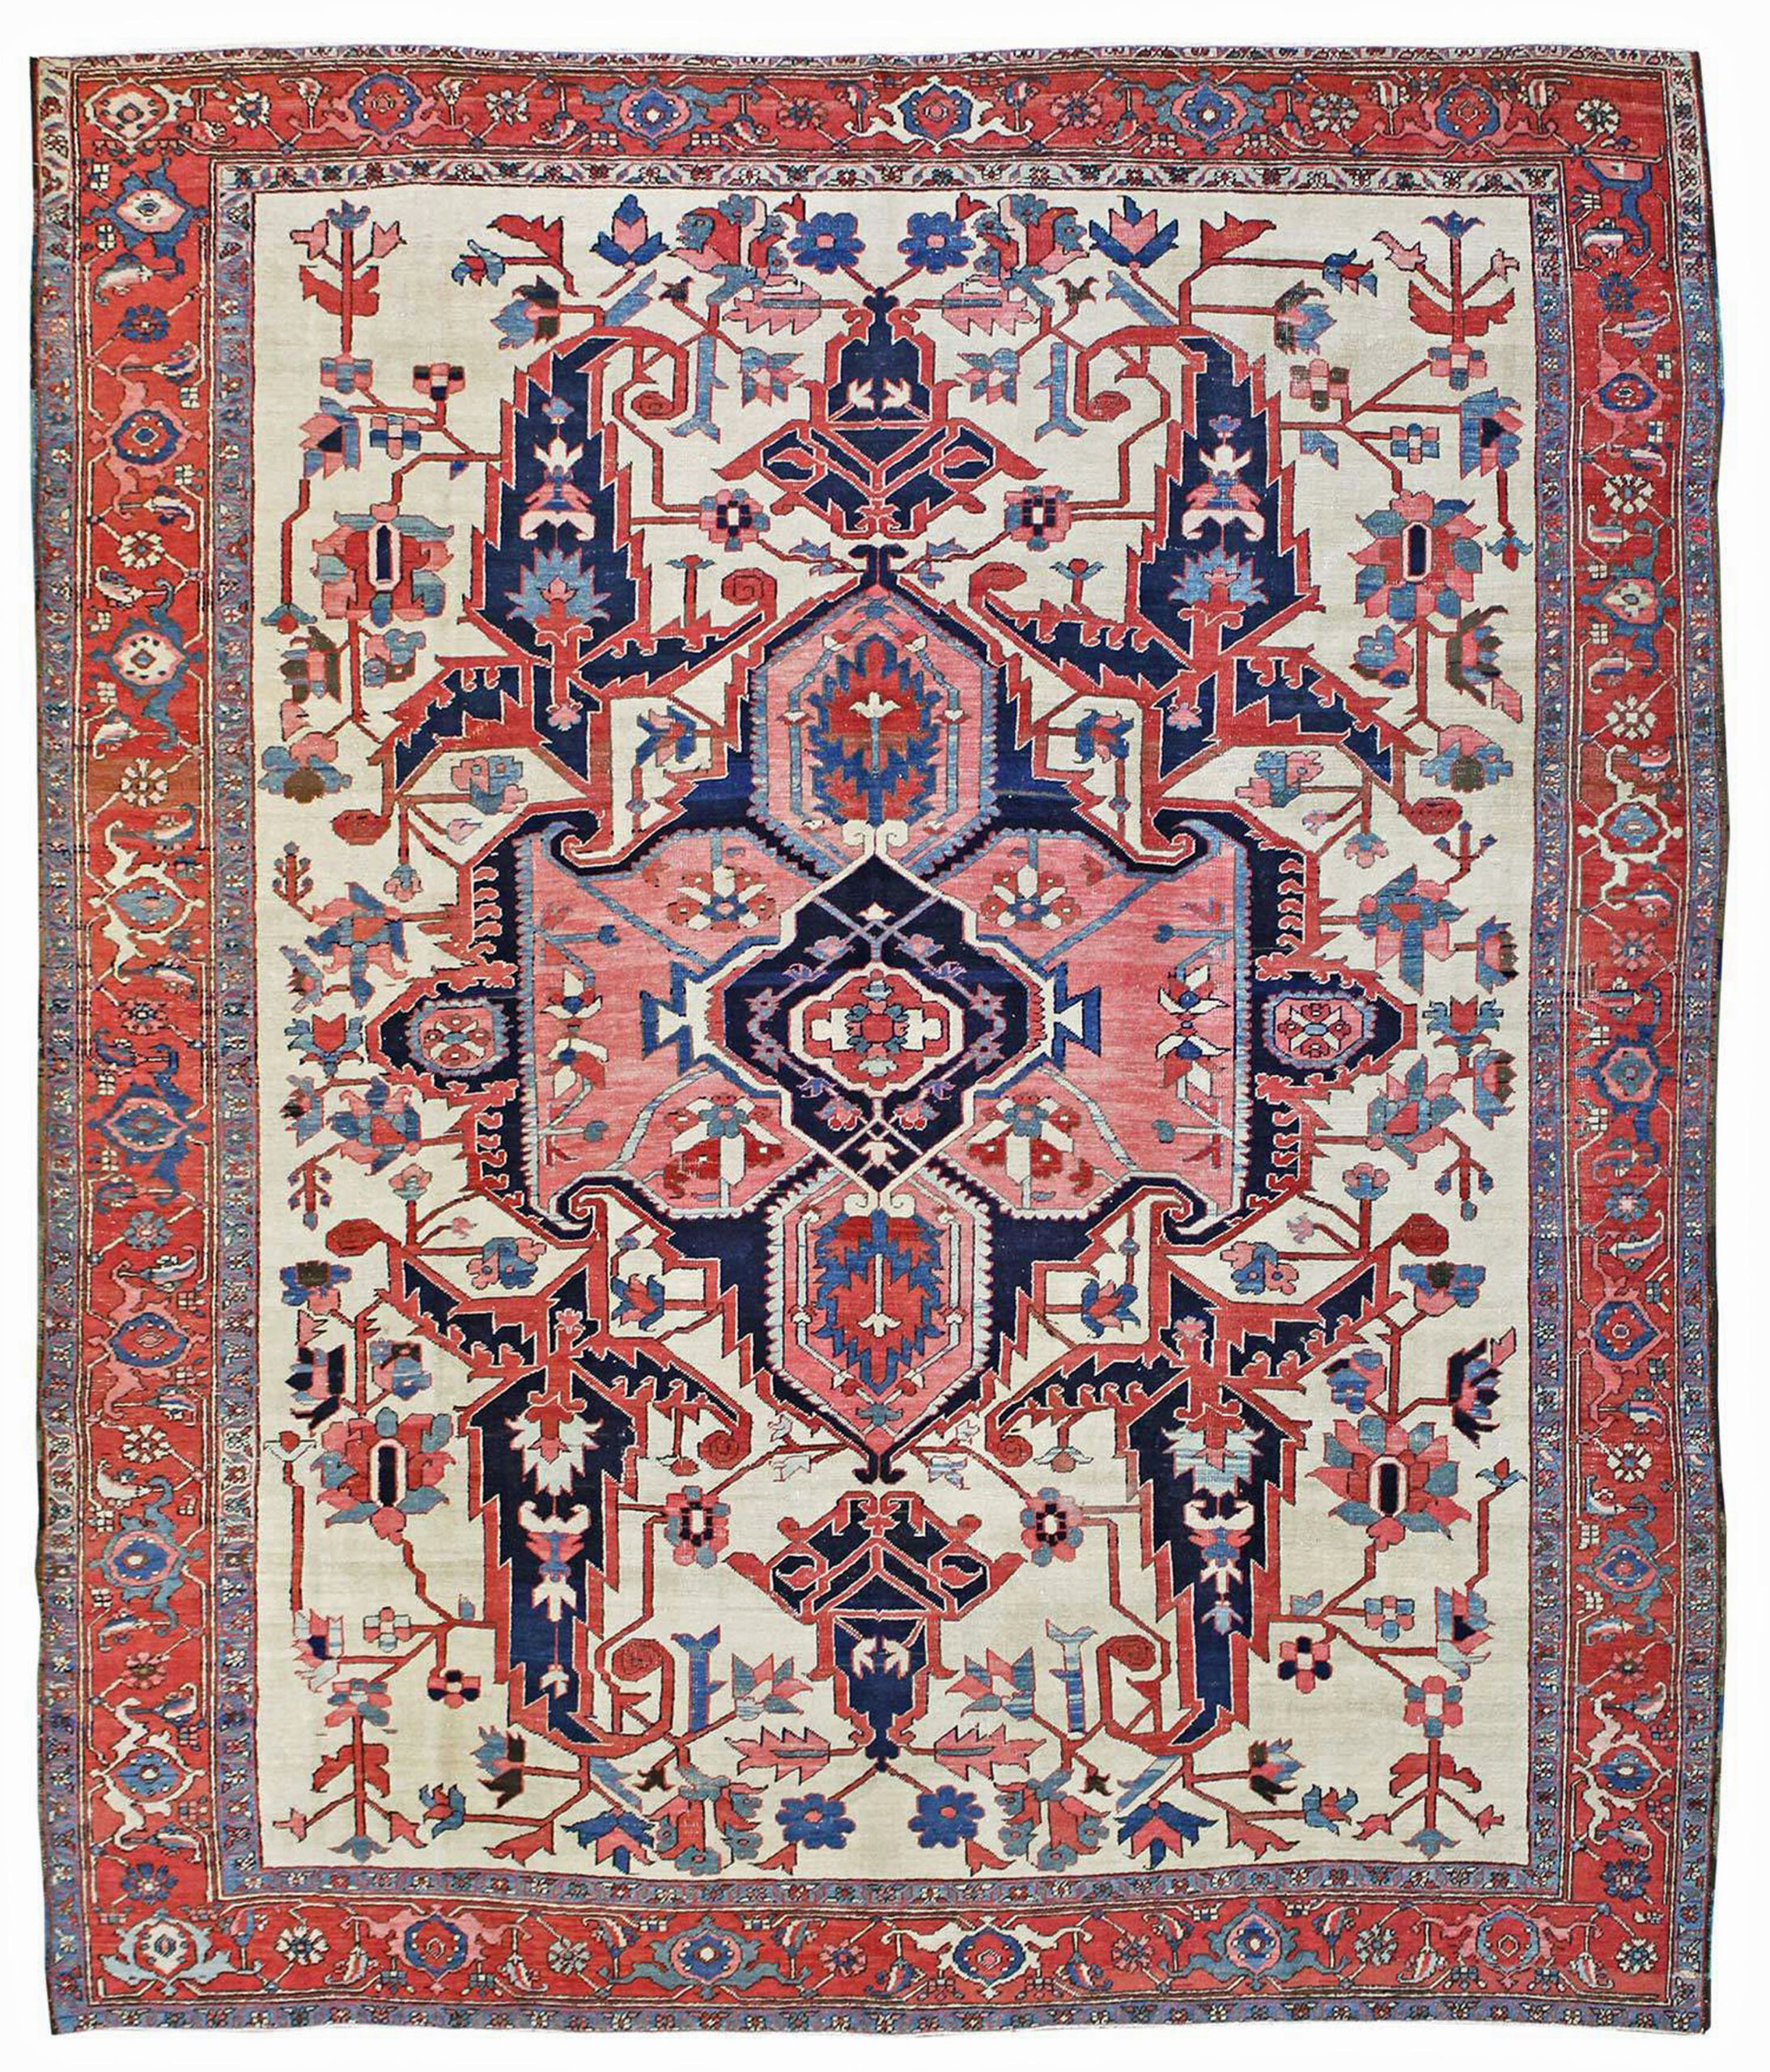 Antique carpets from the Heriz district in northwest Persia, primarily those predating circa 900, are often referred to colloquially as antique "Serapi" carpets. This outstanding example features a navy blue and coral medallion on an ivory field that is also decorated with four large, navy blue leaves and ancillary stylized floral decoration including polychromatic flowers. The format is somewhat uncommon, where there are no corner spandrels, typically a concomitant feature of medallion carpets, and the ivory field instead extends bot vertically and horizontally to where the border system begins. Douglas Stock Gallery is one of America's most selective dealers in antique Persian carpets. Owned by Helen and Douglas Stock, the gallery is located in historic South Natick, Massachusetts, 15 miles west of Boston and 5 minutes from Wellesley center. Open by appointment only Monday through Saturday, Douglas Stock Gallery is convenient to Boston area towns including Brookline, Newton, Belmont, Weston, Wellesley, Needham and Natick and offers a range of antique Persian carpets including Heriz, Serapi, Bakshaish, Fereghan, Sarouk, Kashan, Bidjar, Sultanabad and Tabriz, plus antique tribal rugs from Persia and the Caucasus.